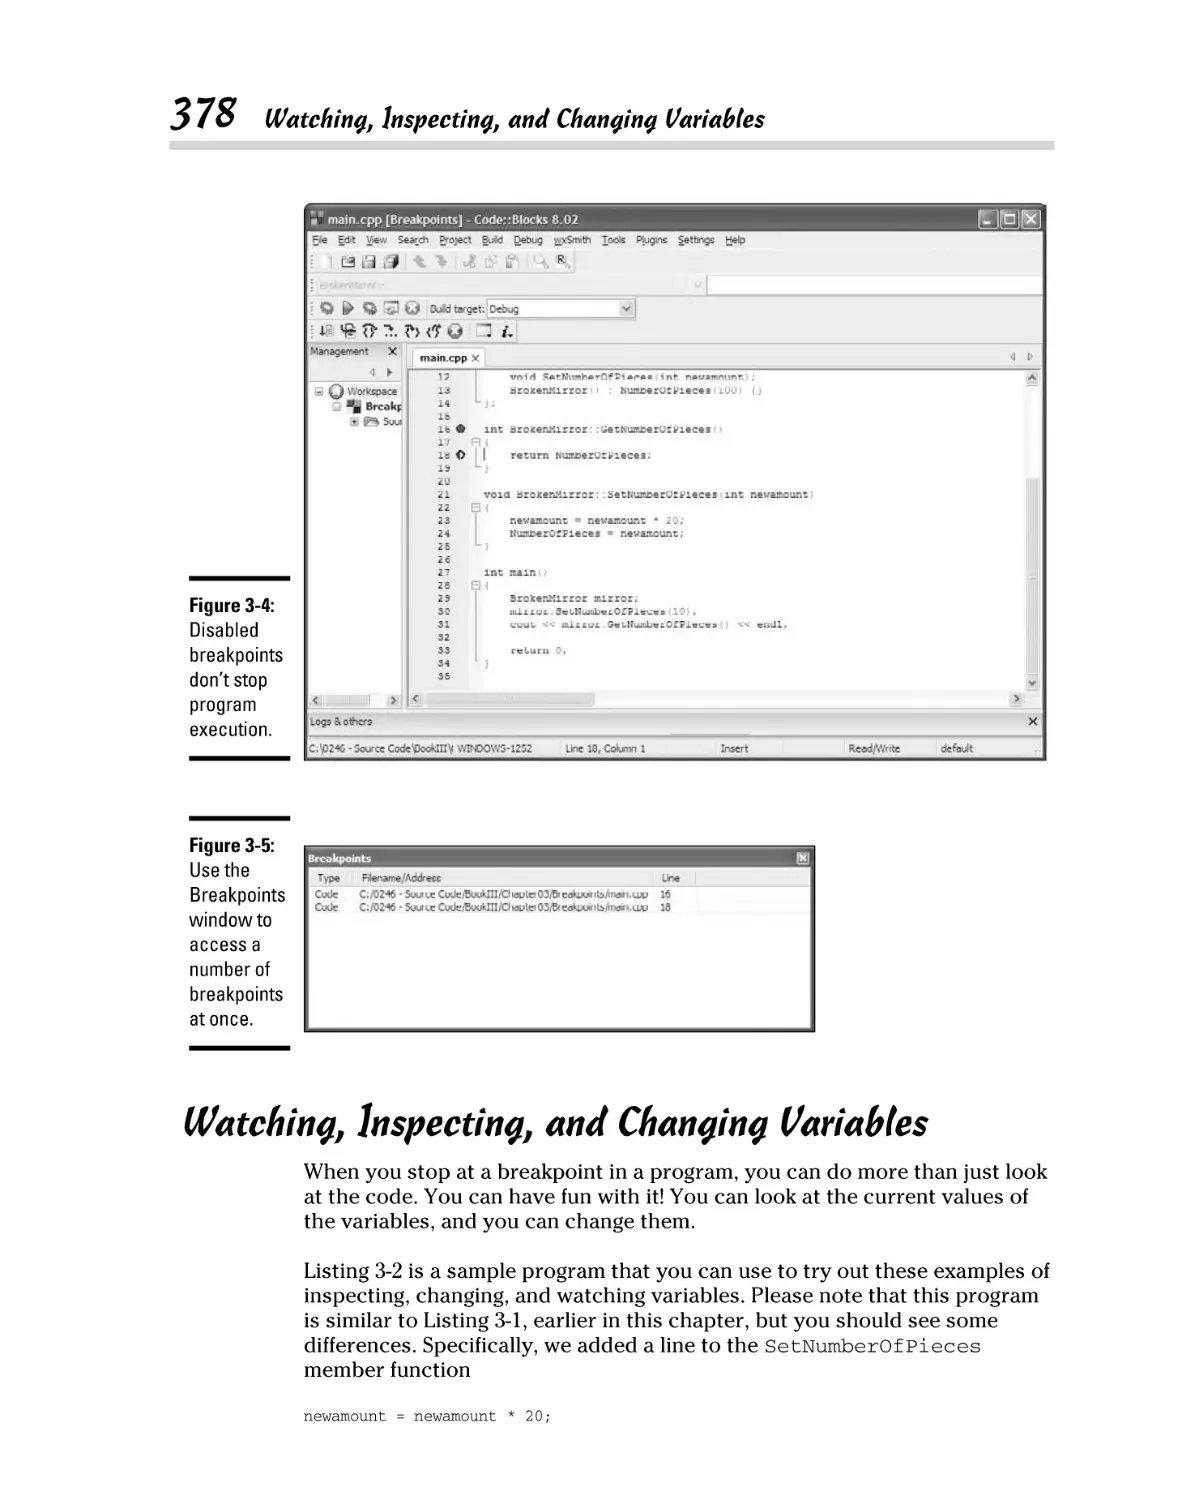 Watching, Inspecting, and Changing Variables